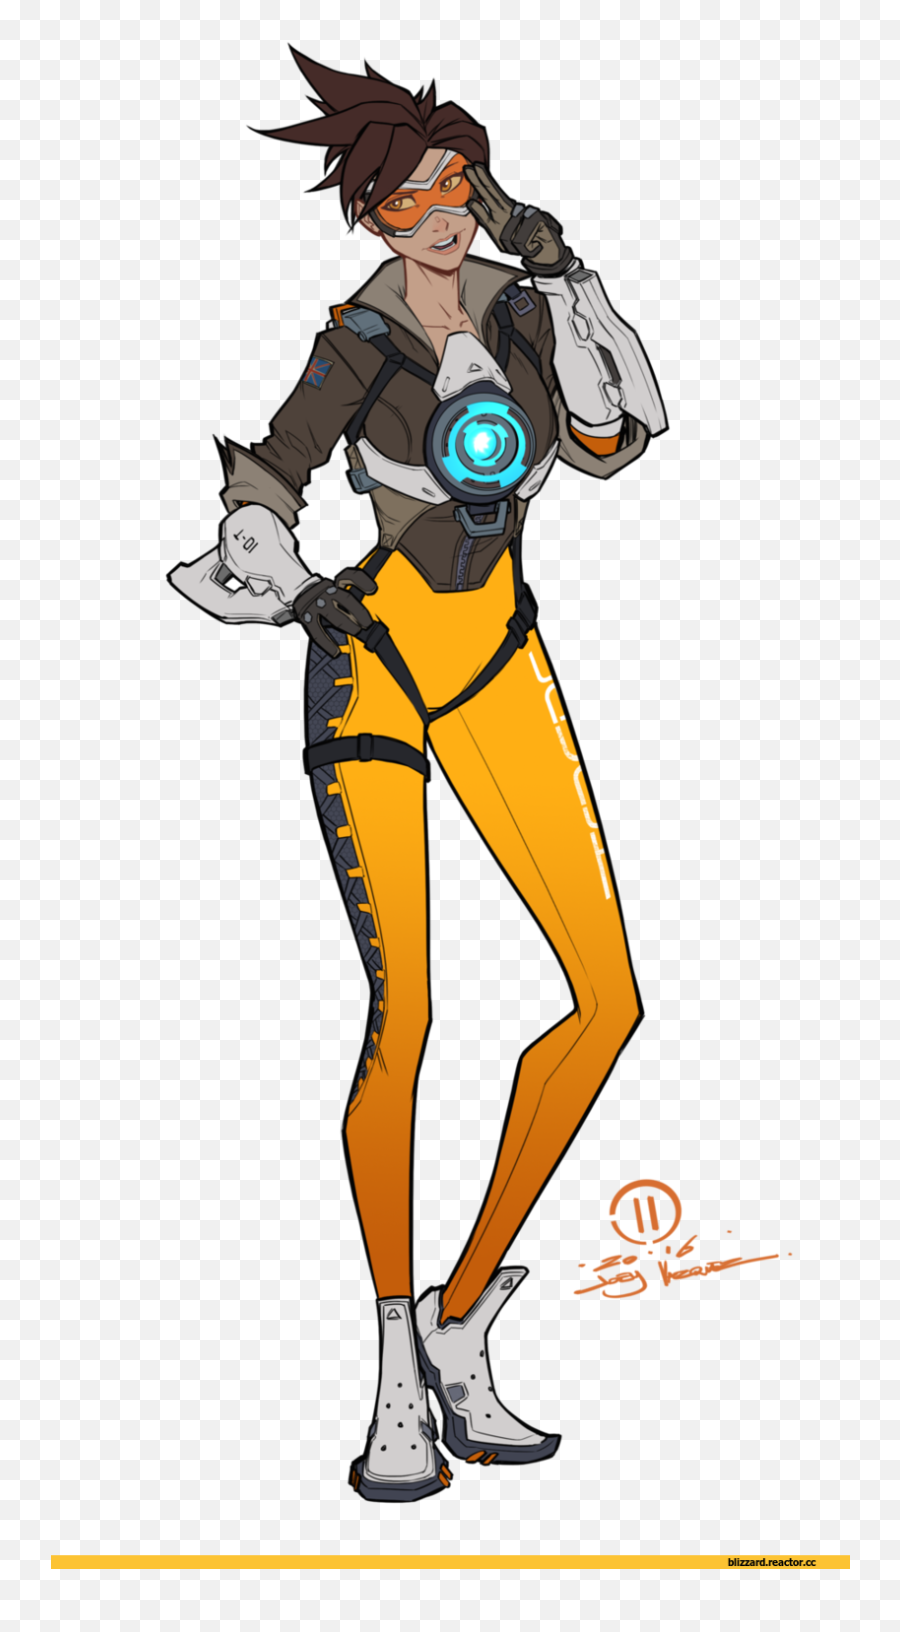 Download Overwatch Art - Overwatch Tracer Gun Holster Full Chara Design Tracer Png,Overwatch Tracer Png